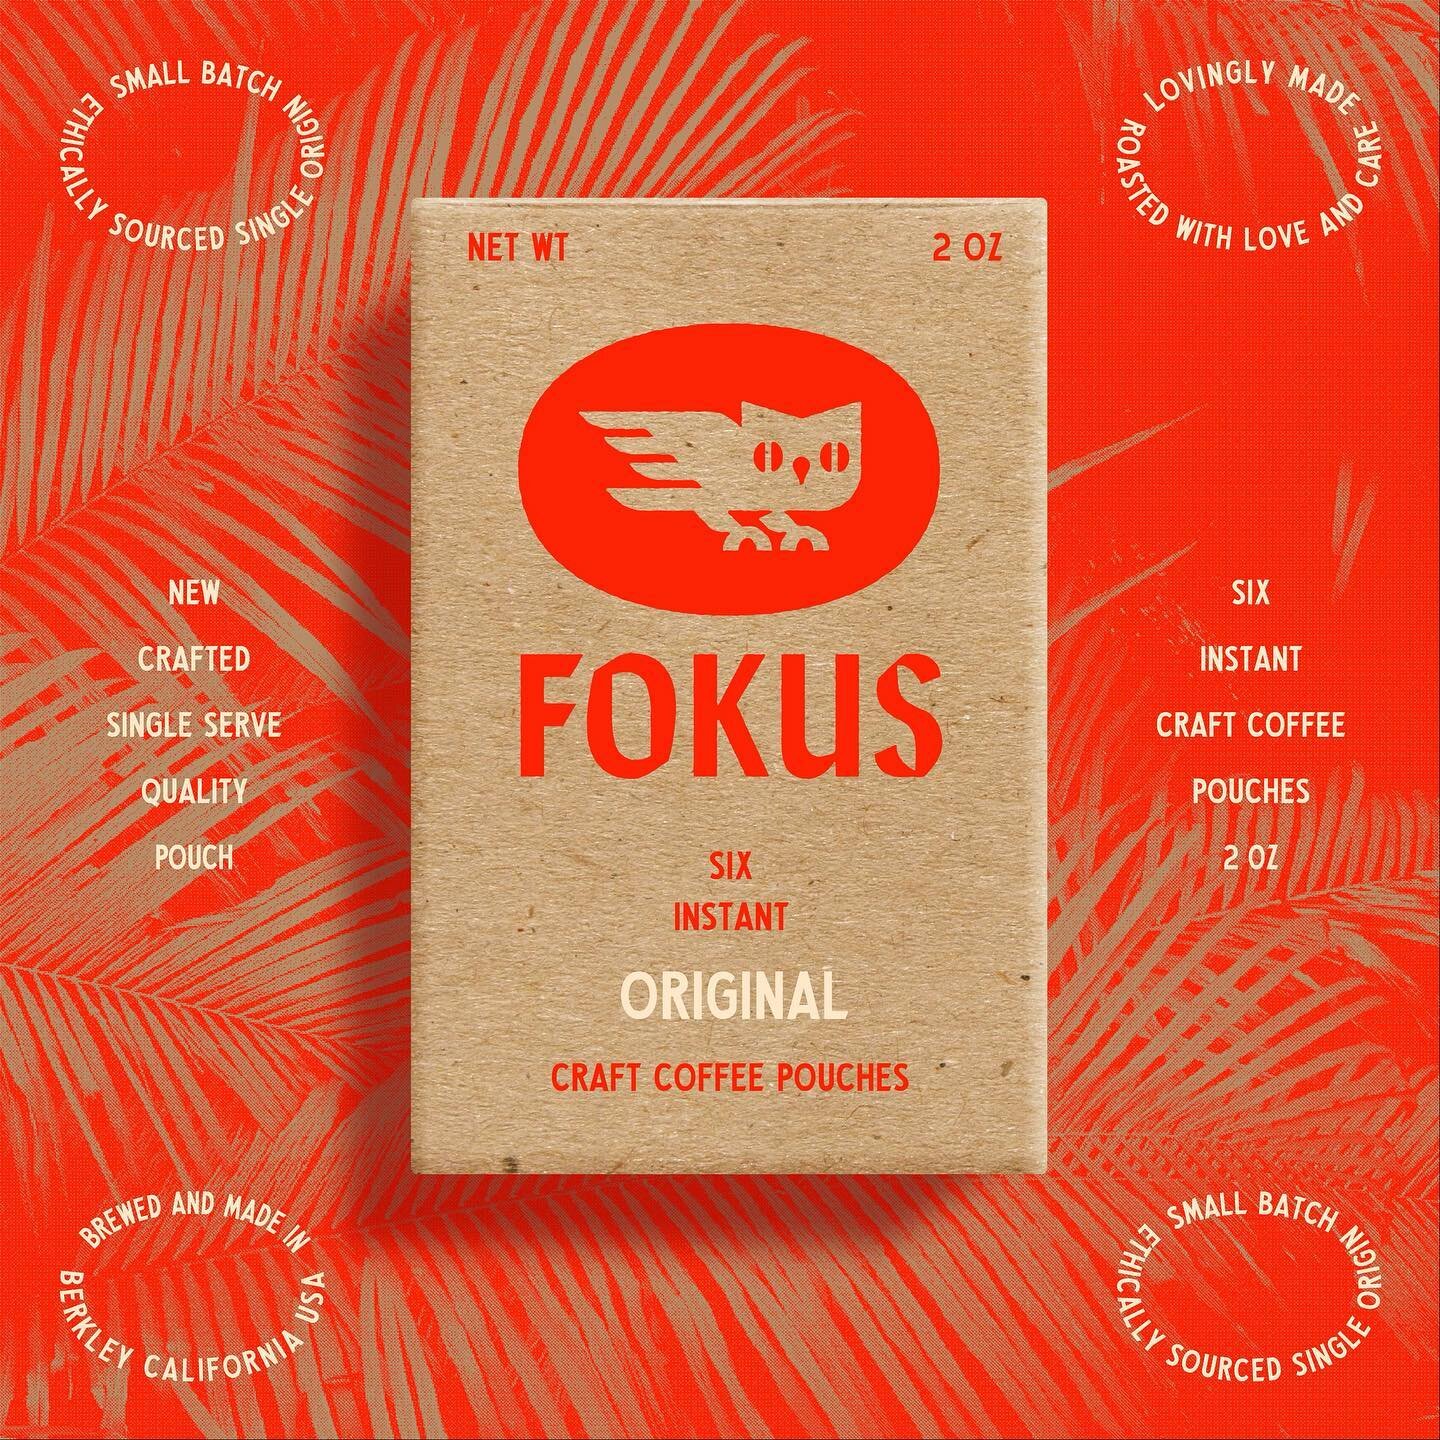 Fokus was a single serve instant coffee brand based out of Berkeley. Unfortunately they are no longer around, however the branding and packaging was super fun and interesting to work on.

Meant to be bold and iconic with a touch of vintage, the brand